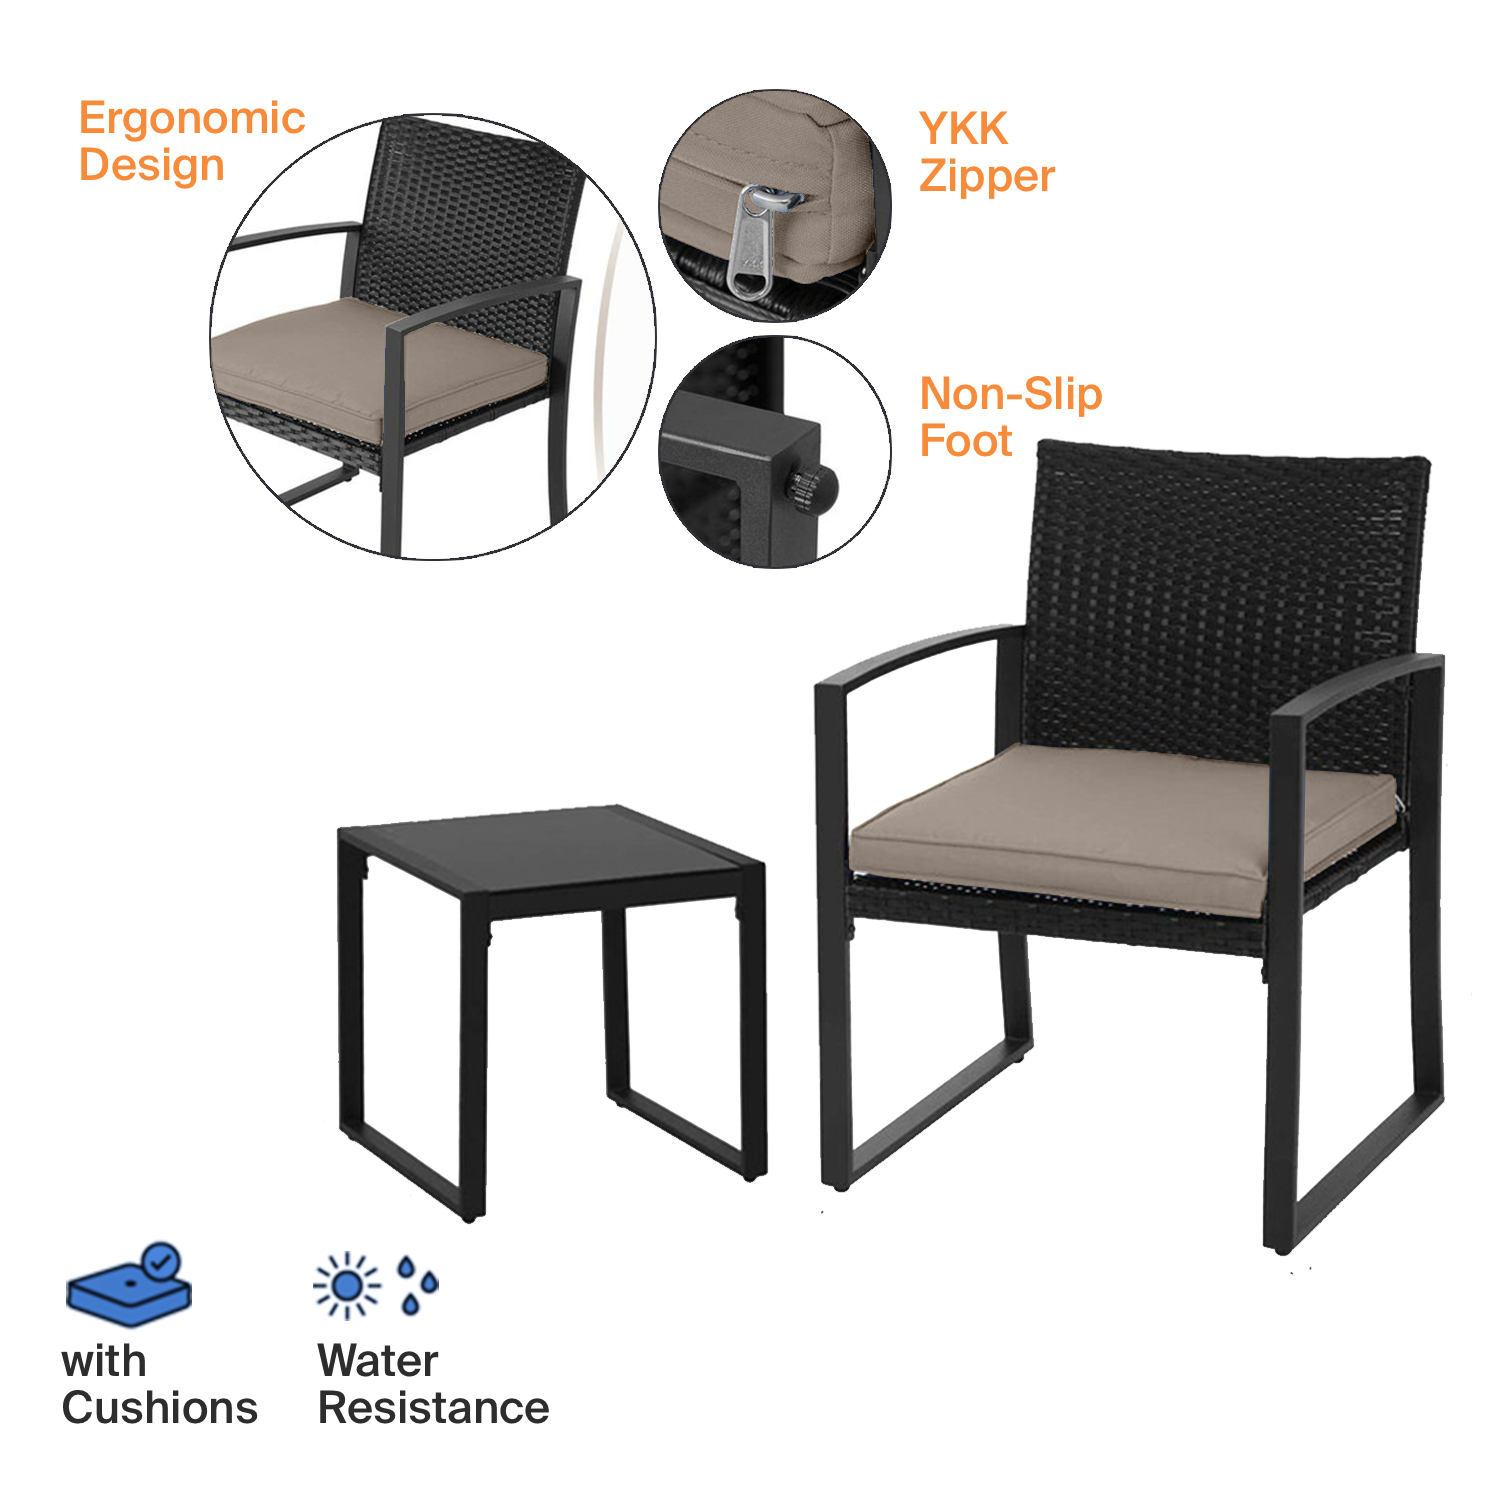 PyramidHomeDecor Black Wicker Furniture - 3 Piece Bistro Set for Outdoor Conversation - 2 Cushioned Rattan Chairs with Glass Coffee Table for Patio, Lawn, Porch, Lounge, Deck, Balcony & Living Room - image 4 of 7